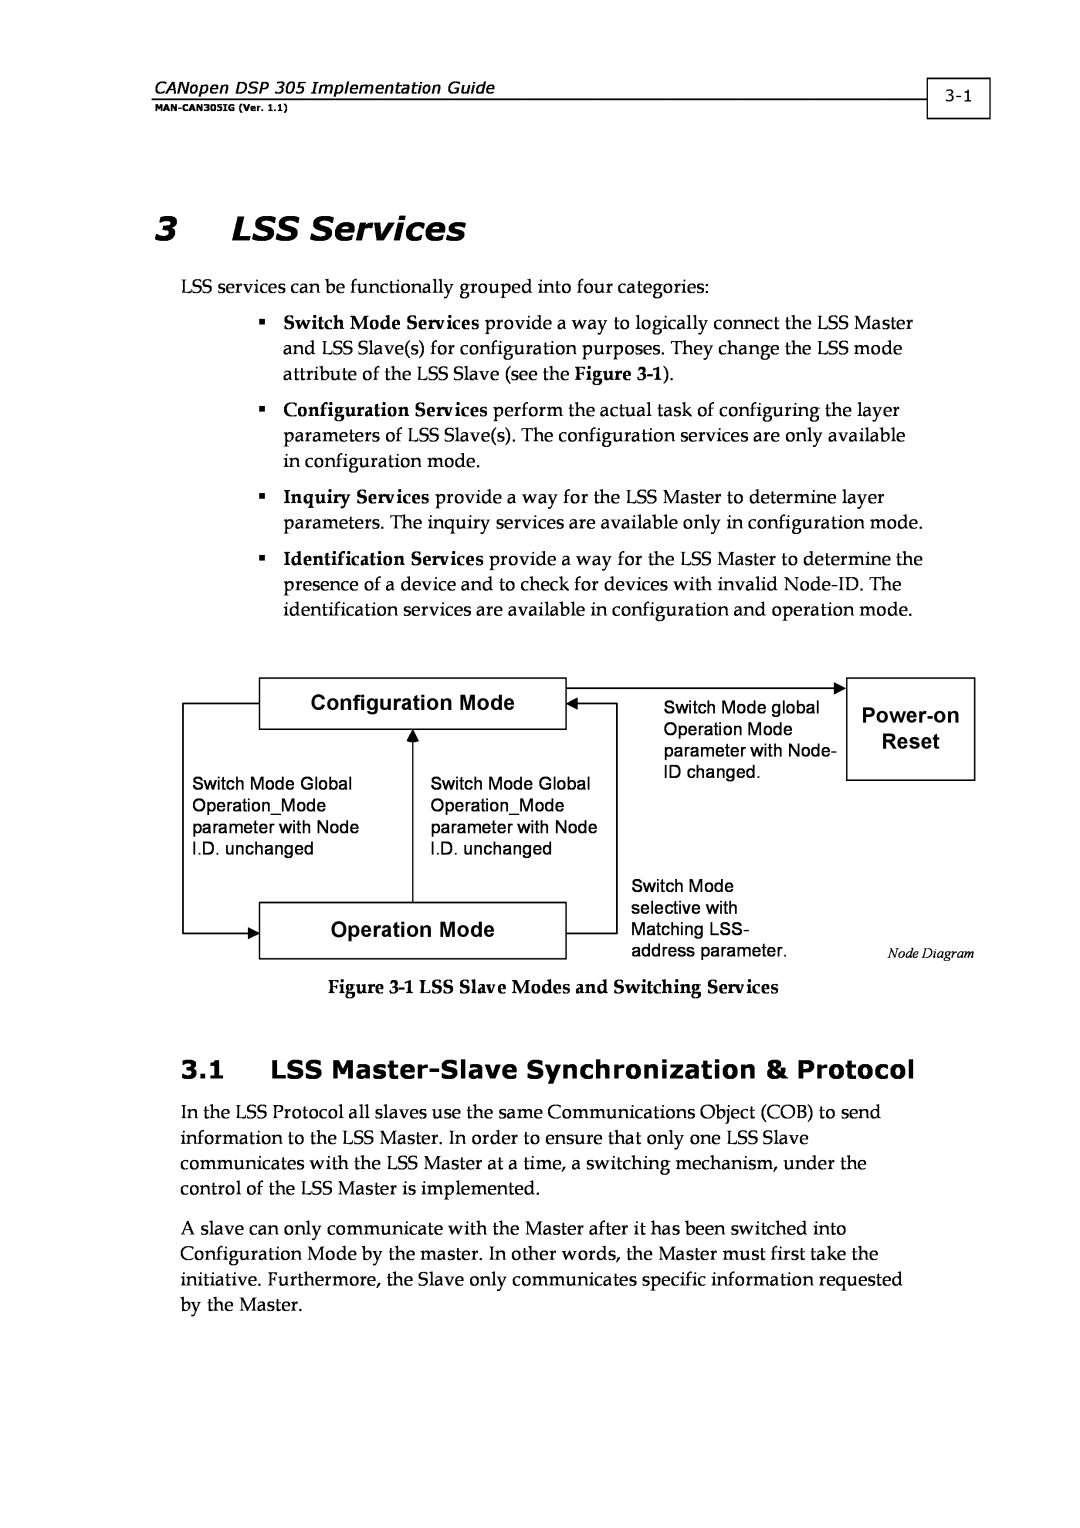 Elmo DSP 305 manual LSS Services, 3.1LSS Master-SlaveSynchronization & Protocol, 1LSS Slave Modes and Switching Services 